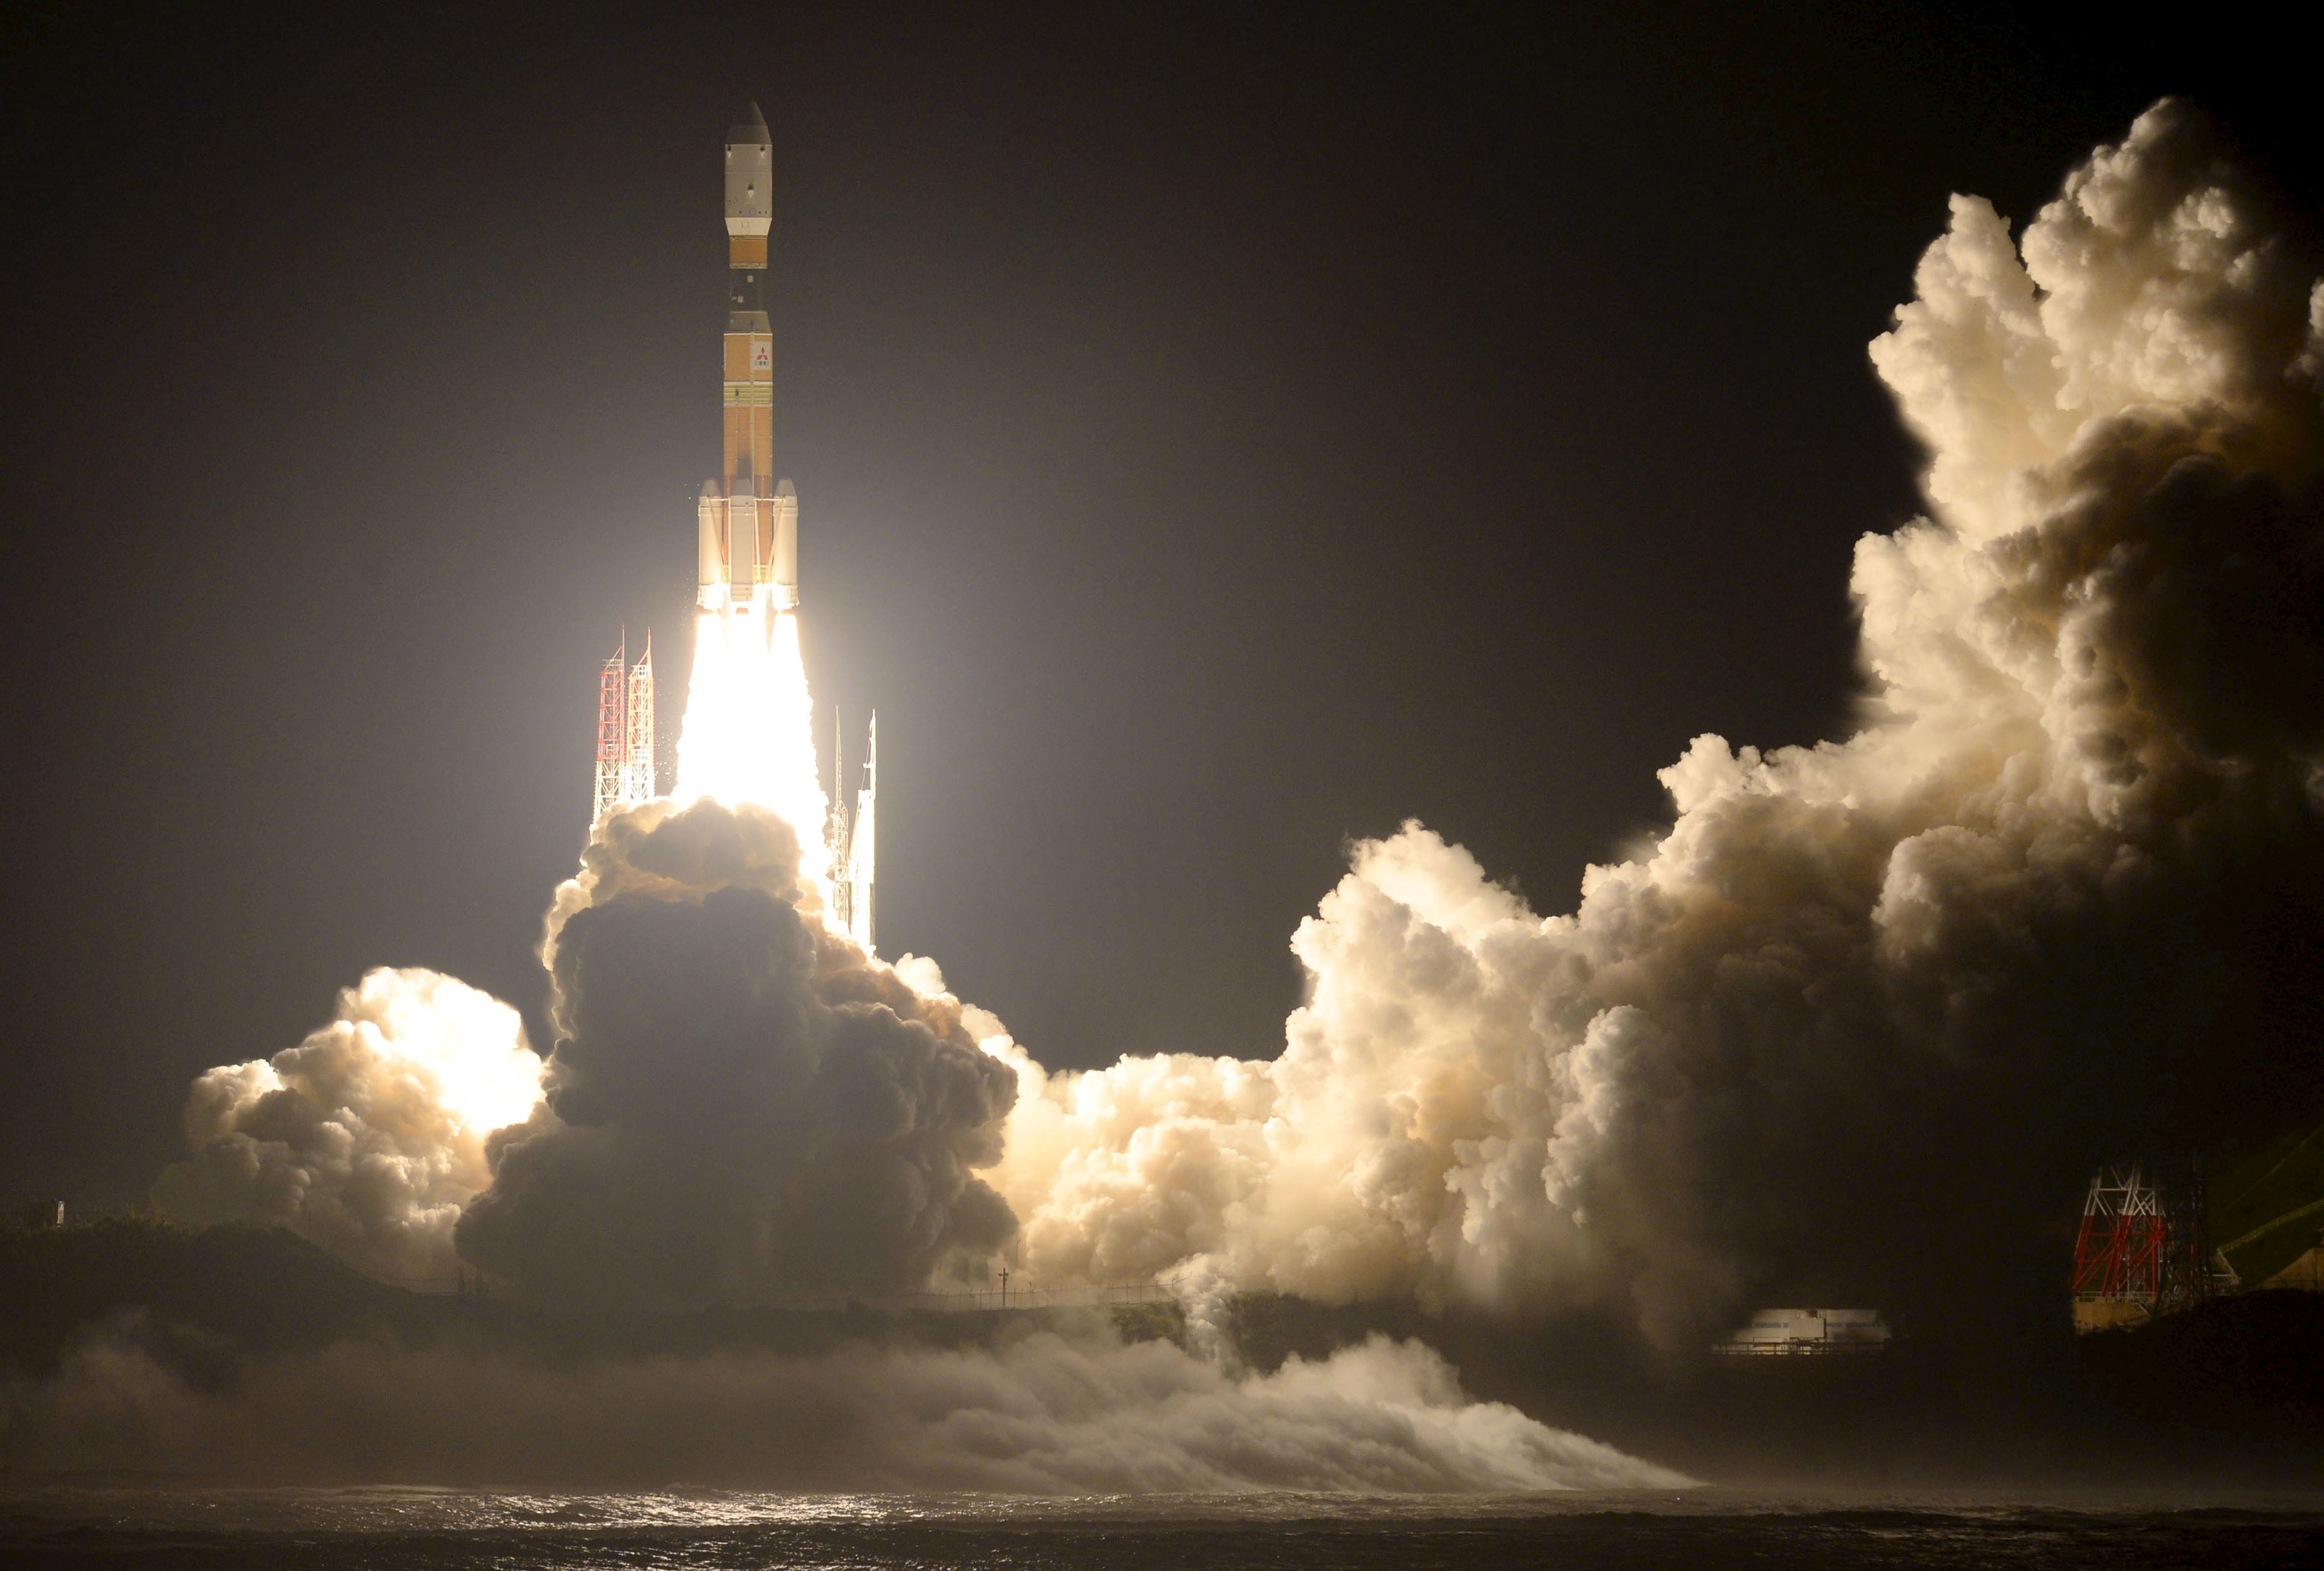 A H-2B rocket carrying cargo craft for the International Space Station (ISS) called "Kounotori No.5" blasts off from the launching pad at Tanegashima Space Center on the Japanese southwestern island of Tanegashima, Kagoshima prefecture, southwestern Japan, in this photo taken by Kyodo August 19, 2015. "Kounotori" which is Japanese for White stork lifted off with supplies for the International Space Station on Wednesday. The unmanned cargo craft is bringing food, hygiene items and spare parts to the ISS.    Mandatory credit REUTERS/Kyodo ATTENTION EDITORS - FOR EDITORIAL USE ONLY. NOT FOR SALE FOR MARKETING OR ADVERTISING CAMPAIGNS. THIS IMAGE HAS BEEN SUPPLIED BY A THIRD PARTY. IT IS DISTRIBUTED, EXACTLY AS RECEIVED BY REUTERS, AS A SERVICE TO CLIENTS. MANDATORY CREDIT. JAPAN OUT. NO COMMERCIAL OR EDITORIAL SALES IN JAPAN.